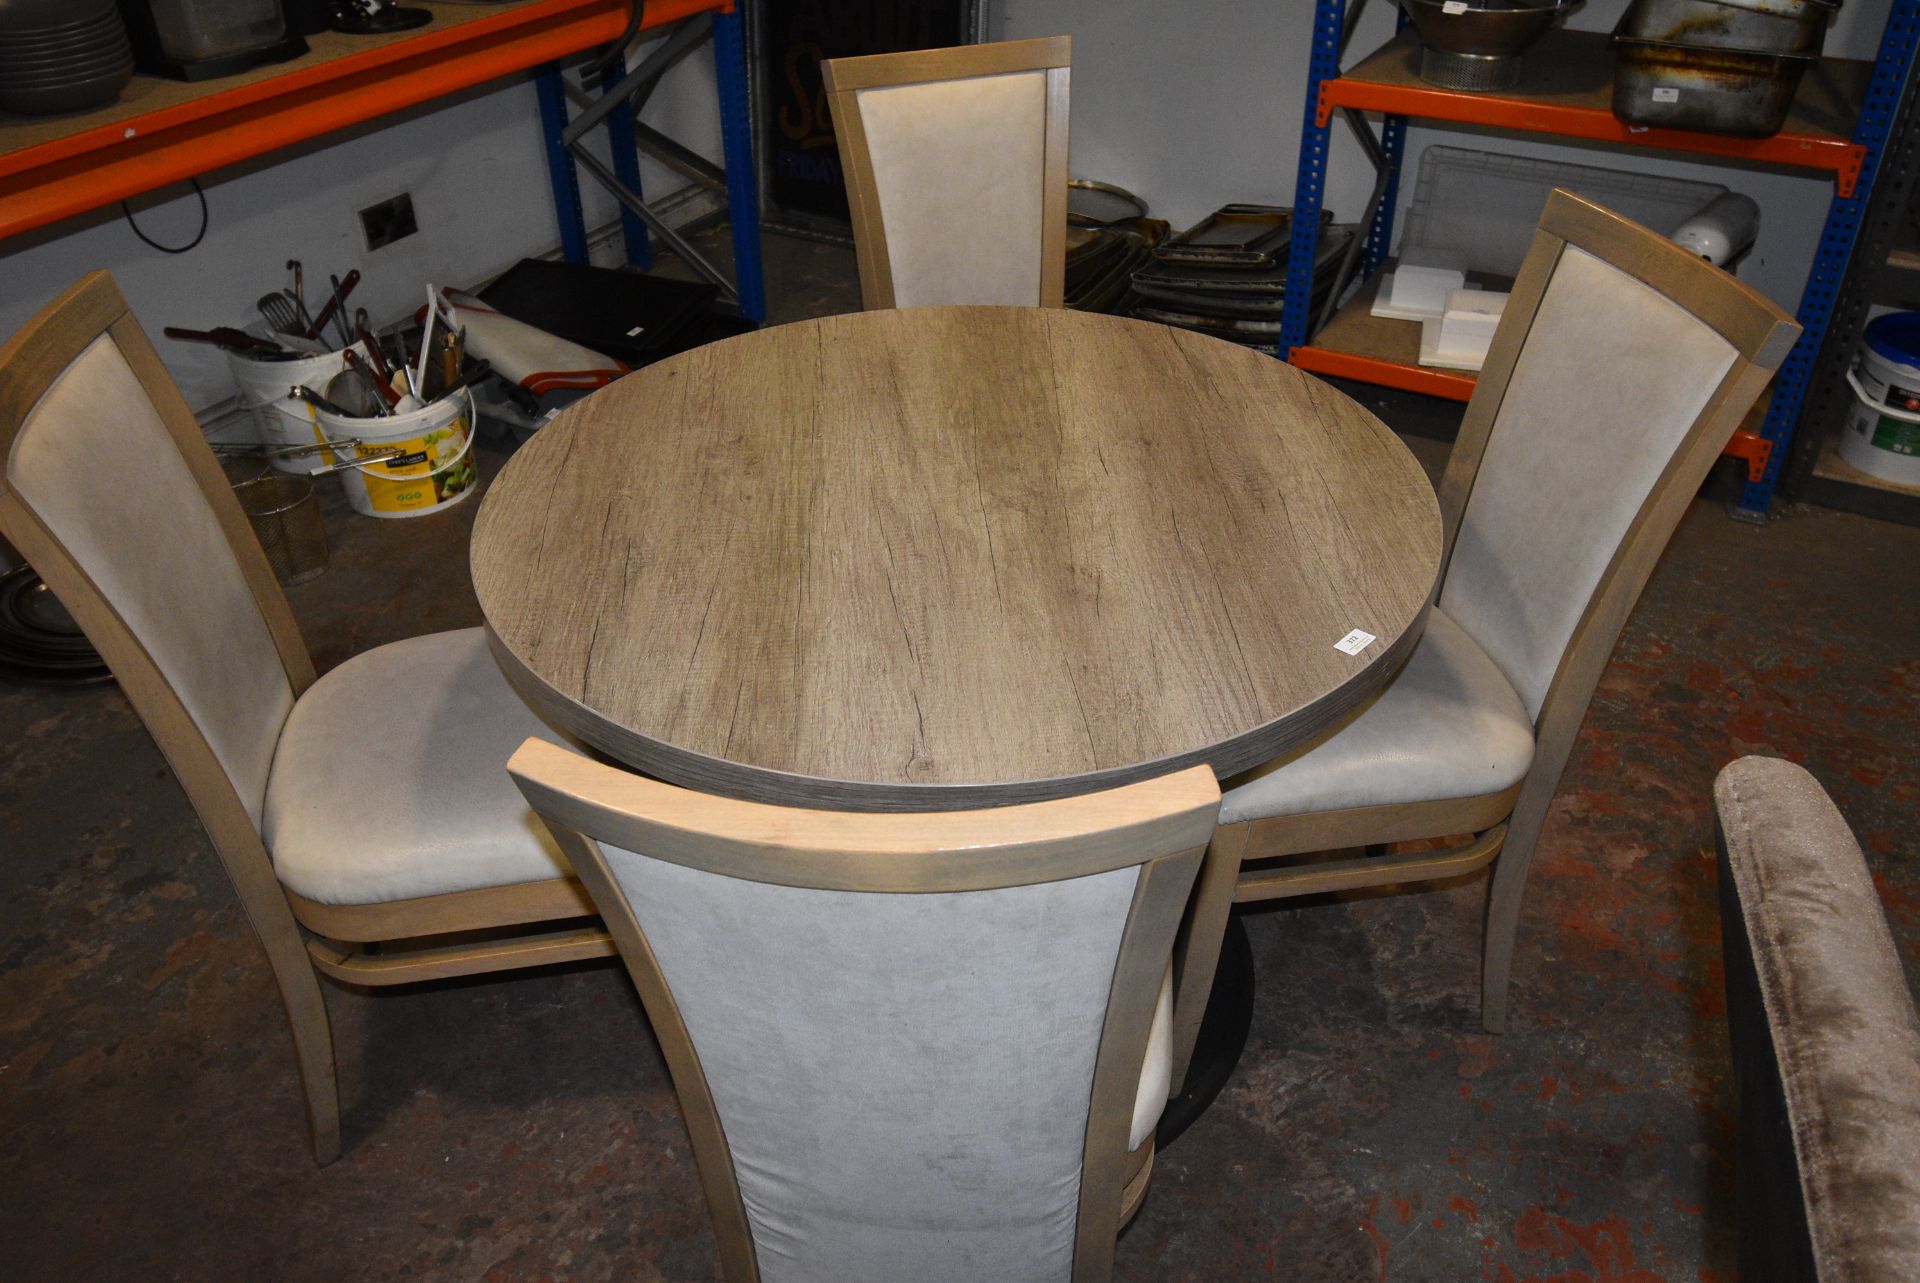 100cm Circular Single Pedestal Table with Four Chairs